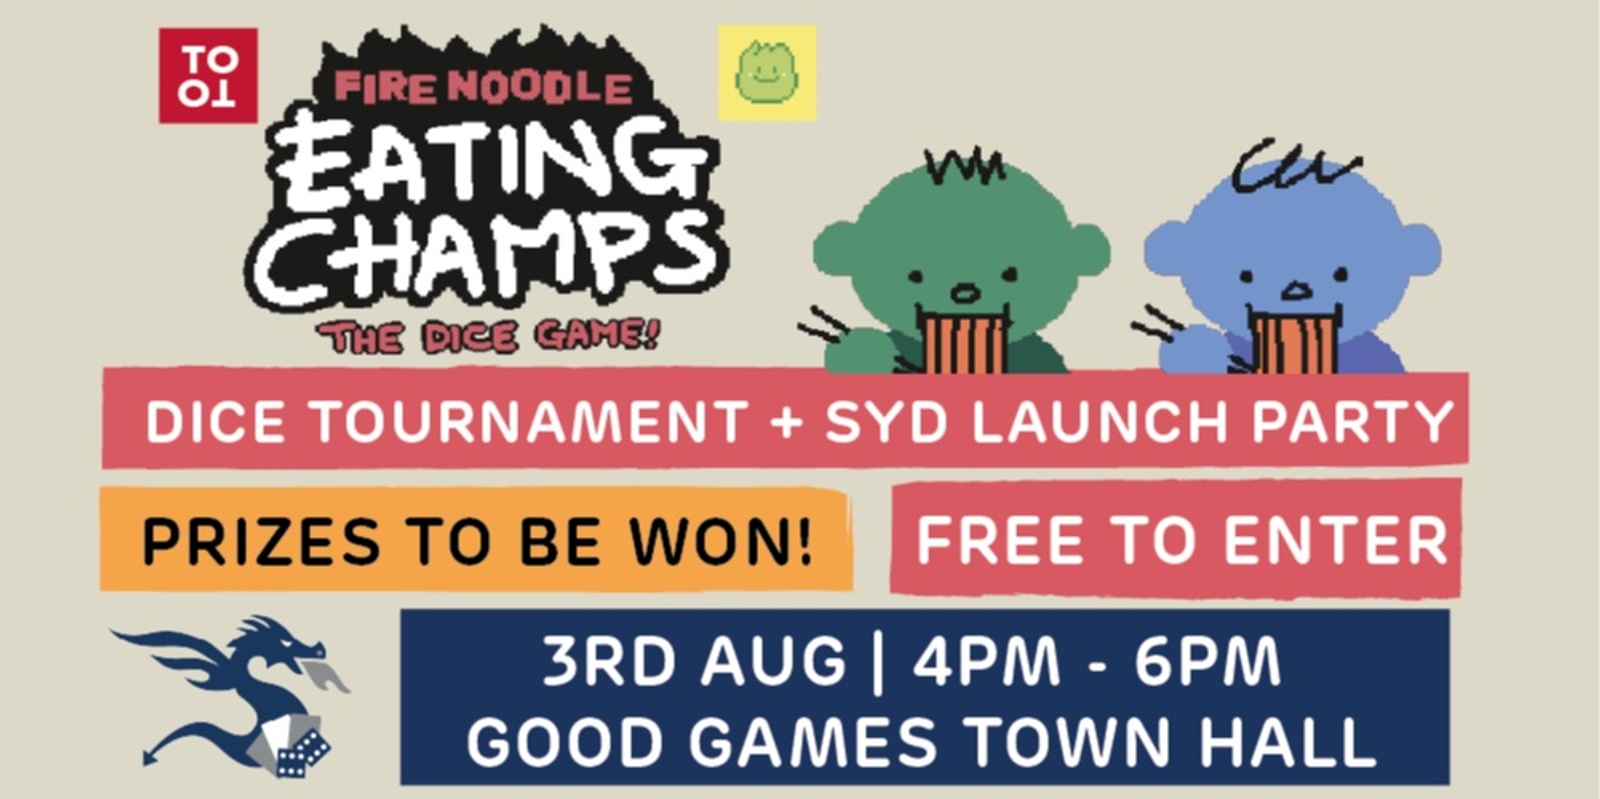 Banner image for Fire Noodle Eating Champs: The Dice Game! Tournament! + Game Launch